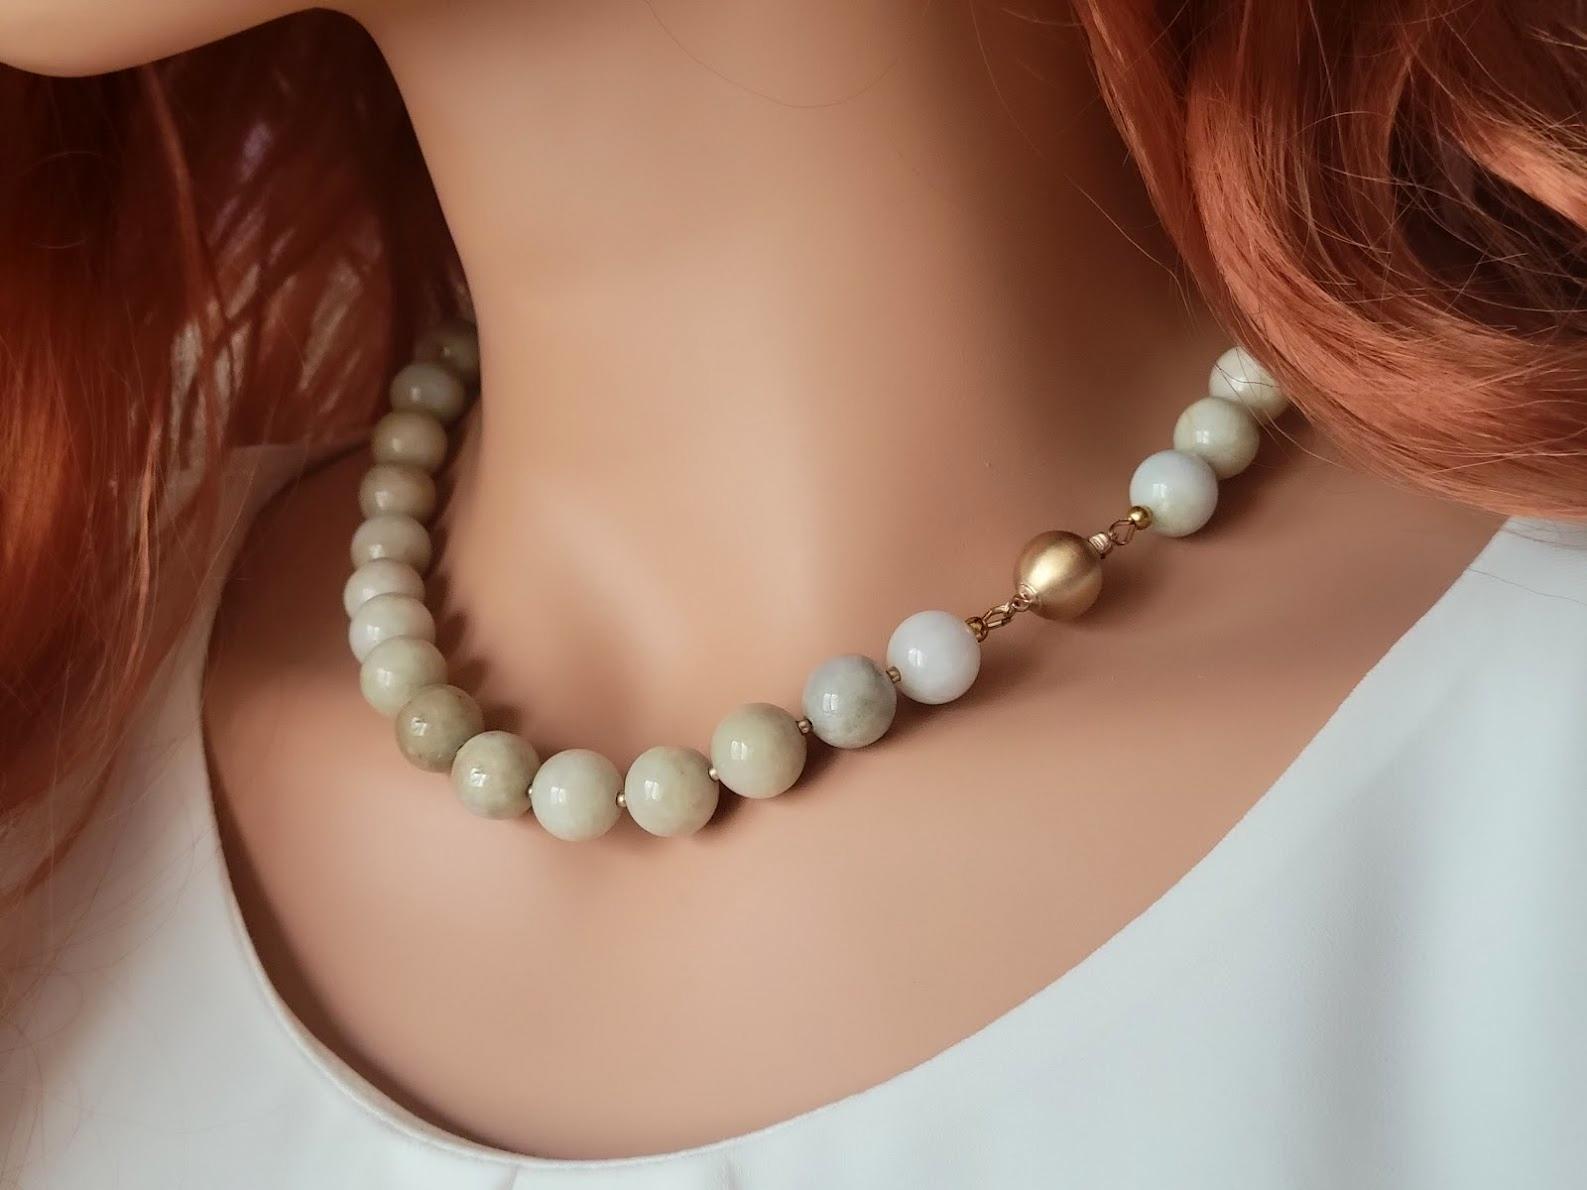 Antique Honey Tan Jade Necklace In Excellent Condition For Sale In Chesterland, OH